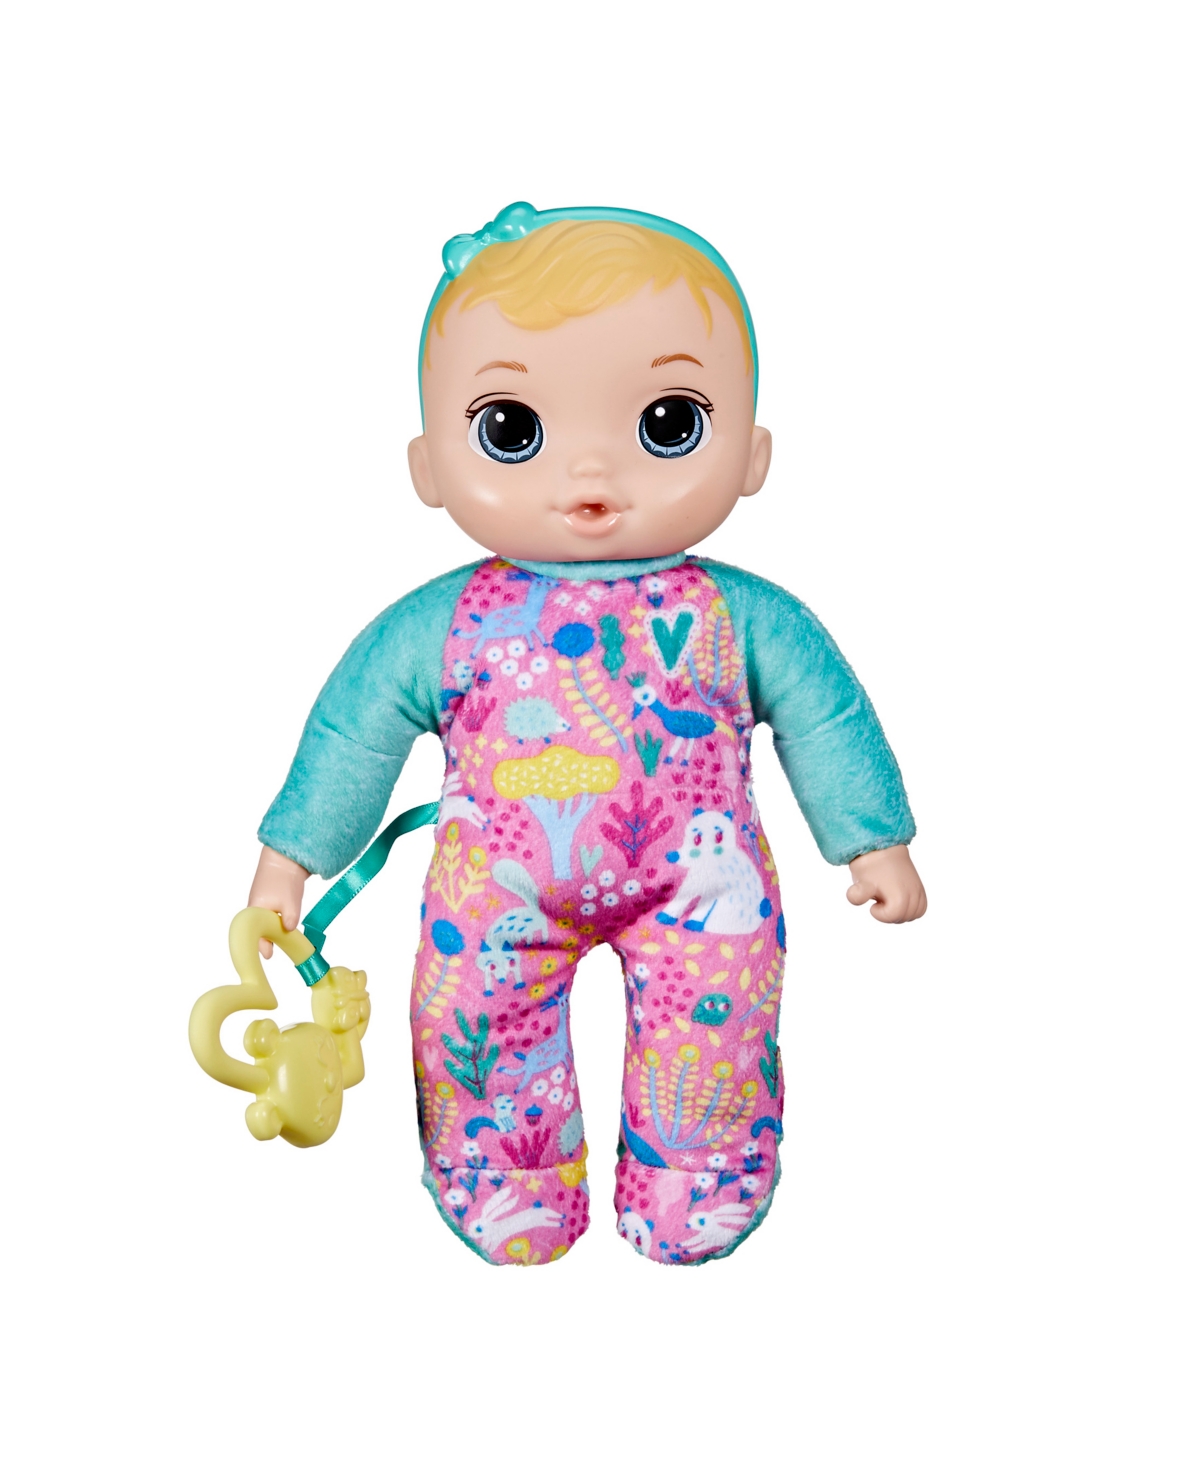 Baby Alive Kids' Soften Cute Doll, Blonde Hair In No Color